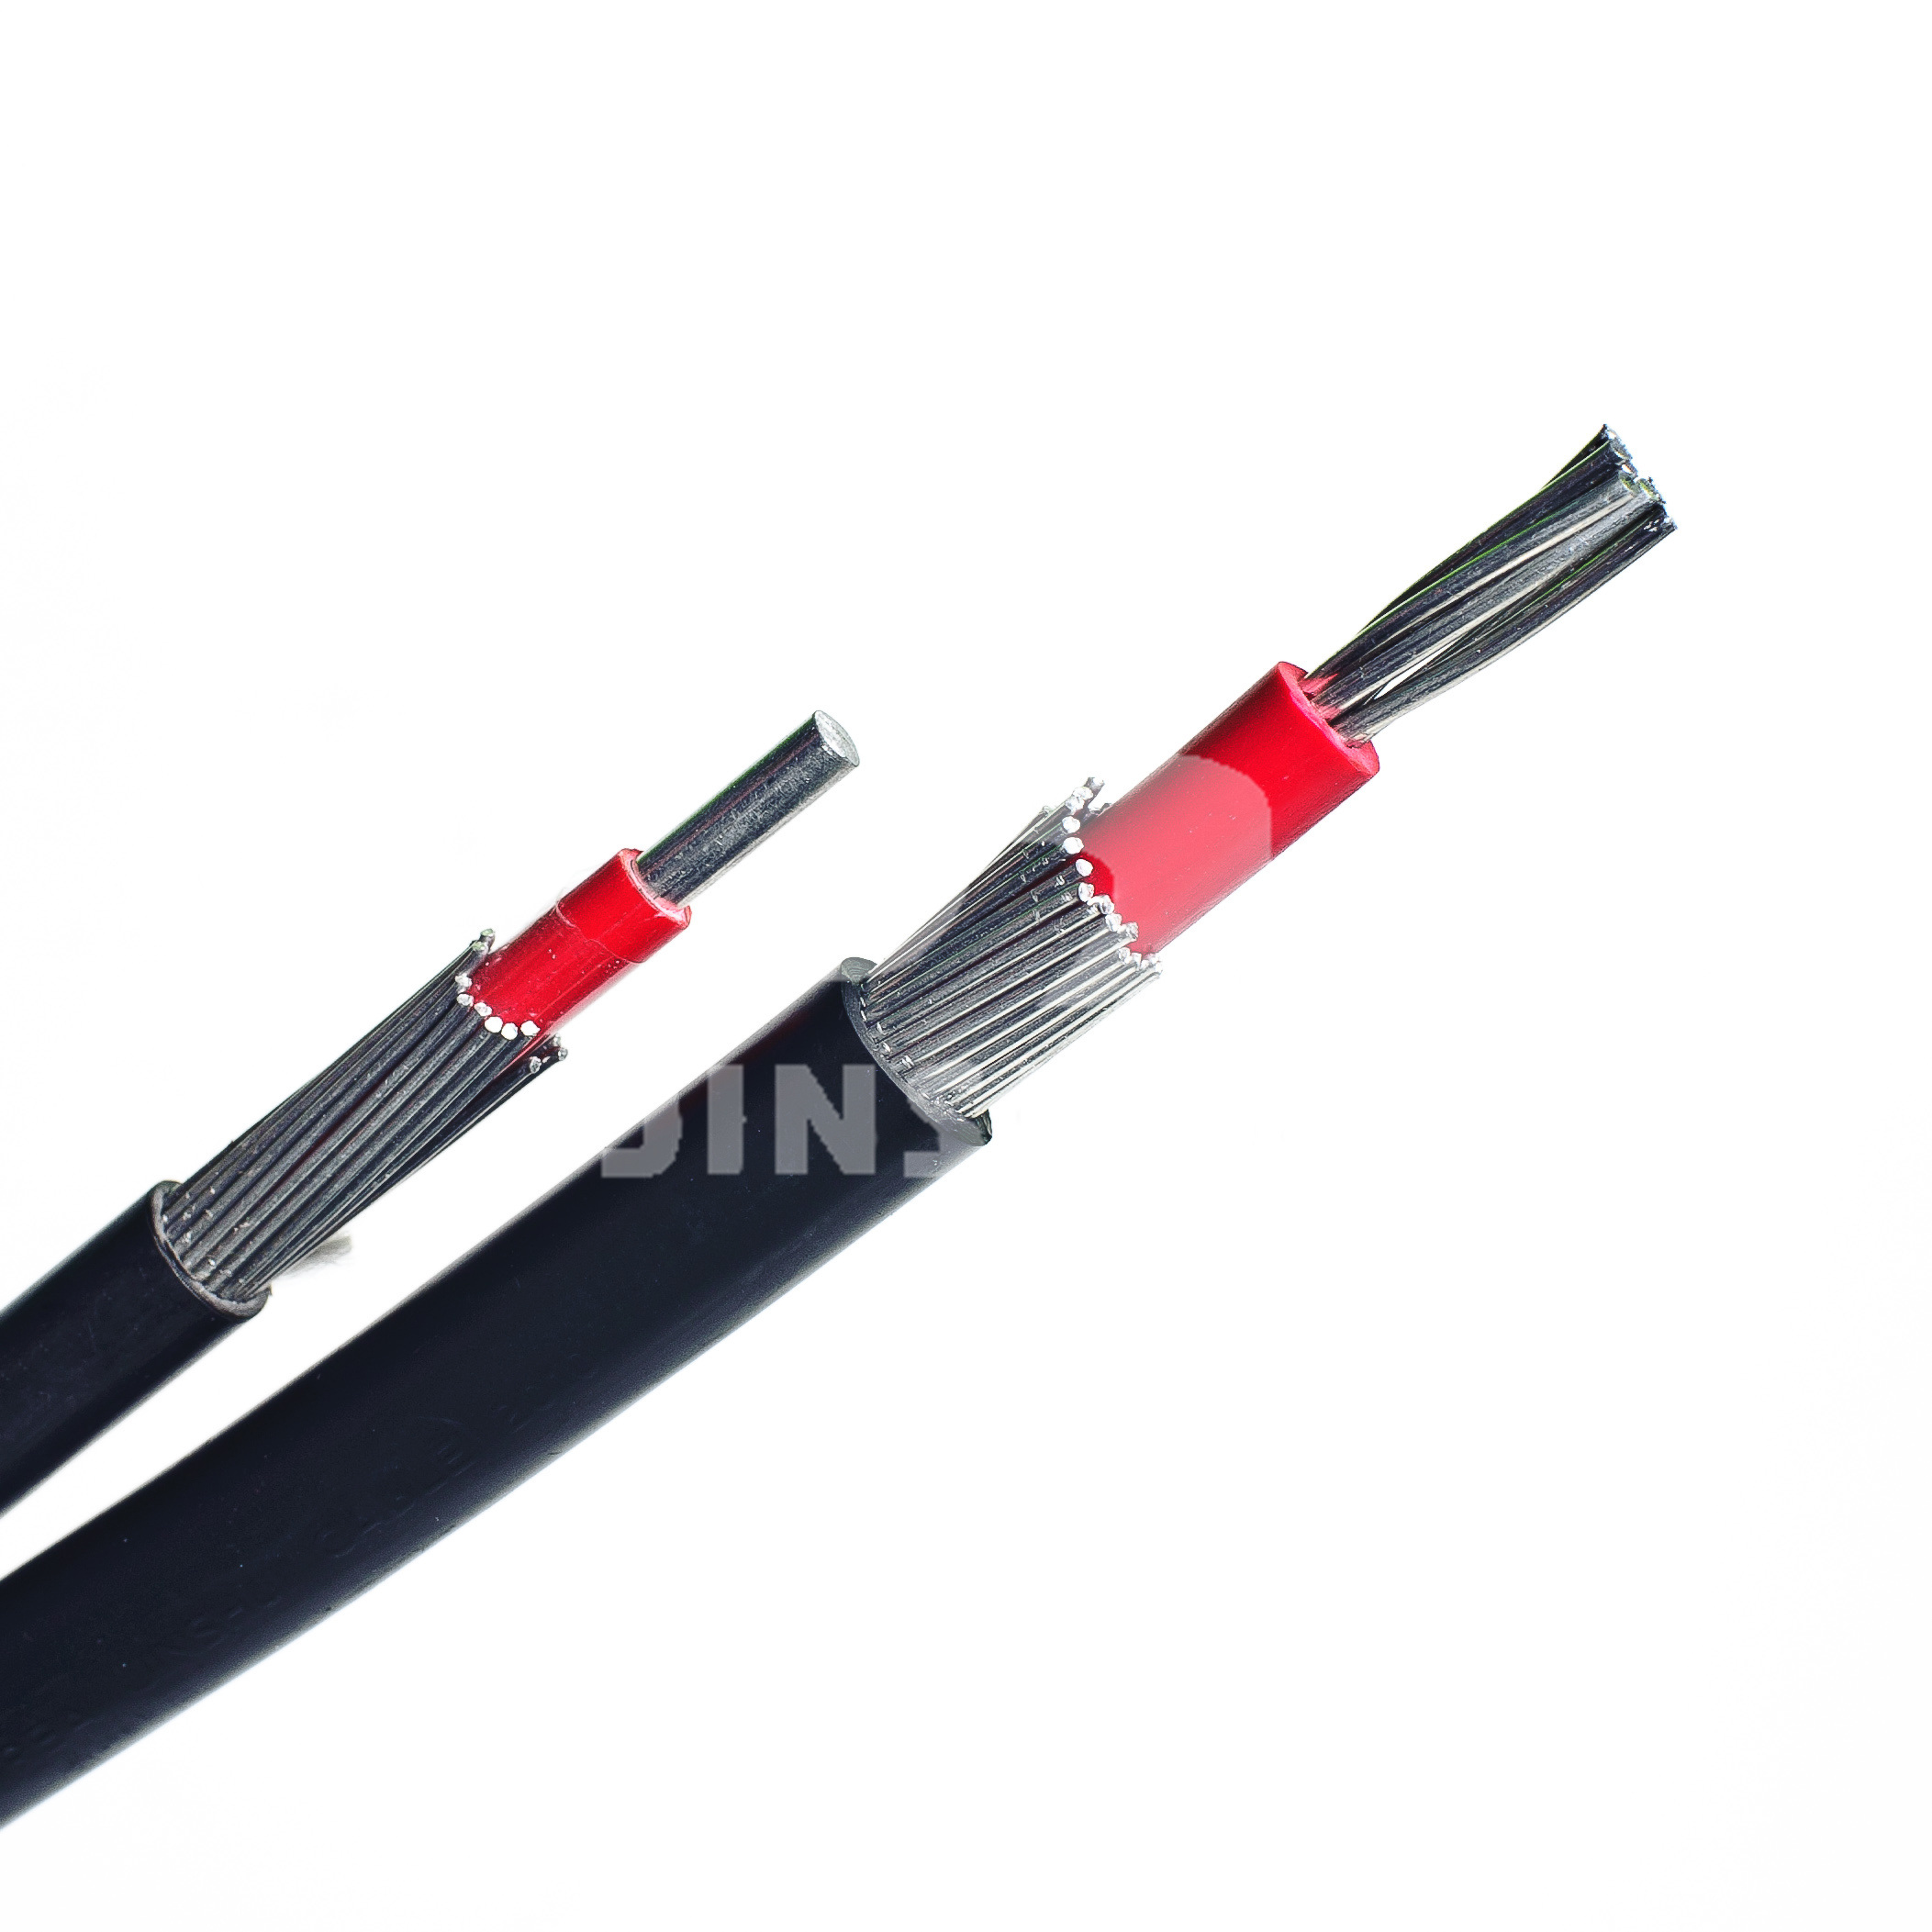 XLPE/PE/PVC Insulation Split Concentric Cable Termination Use for Kenya